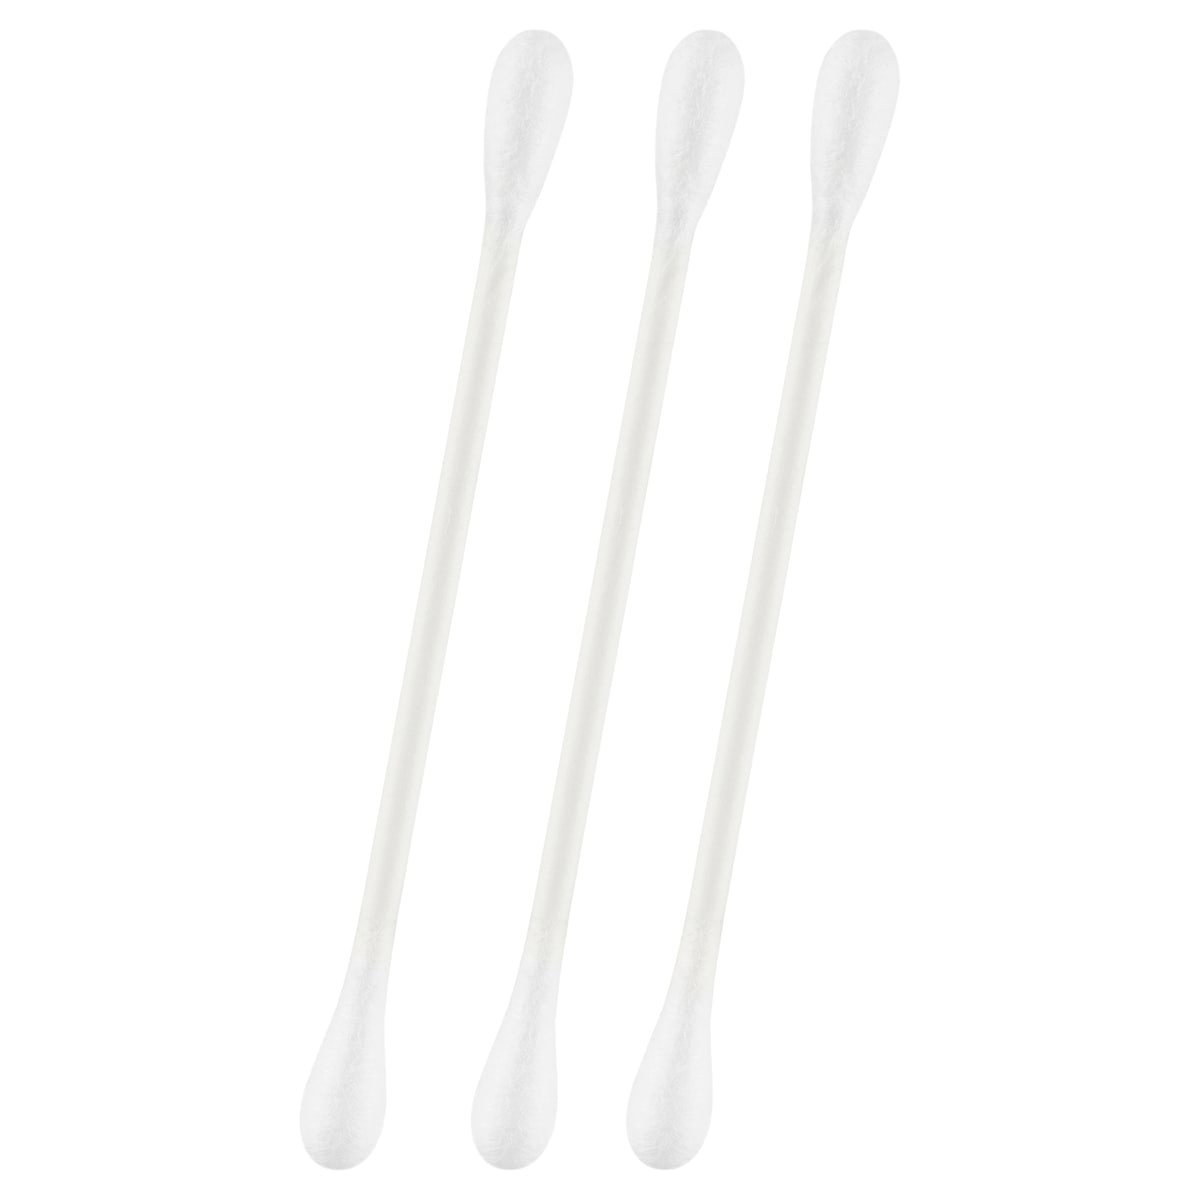 Swisspers Cotton Tips Paper Stems 400 Pack